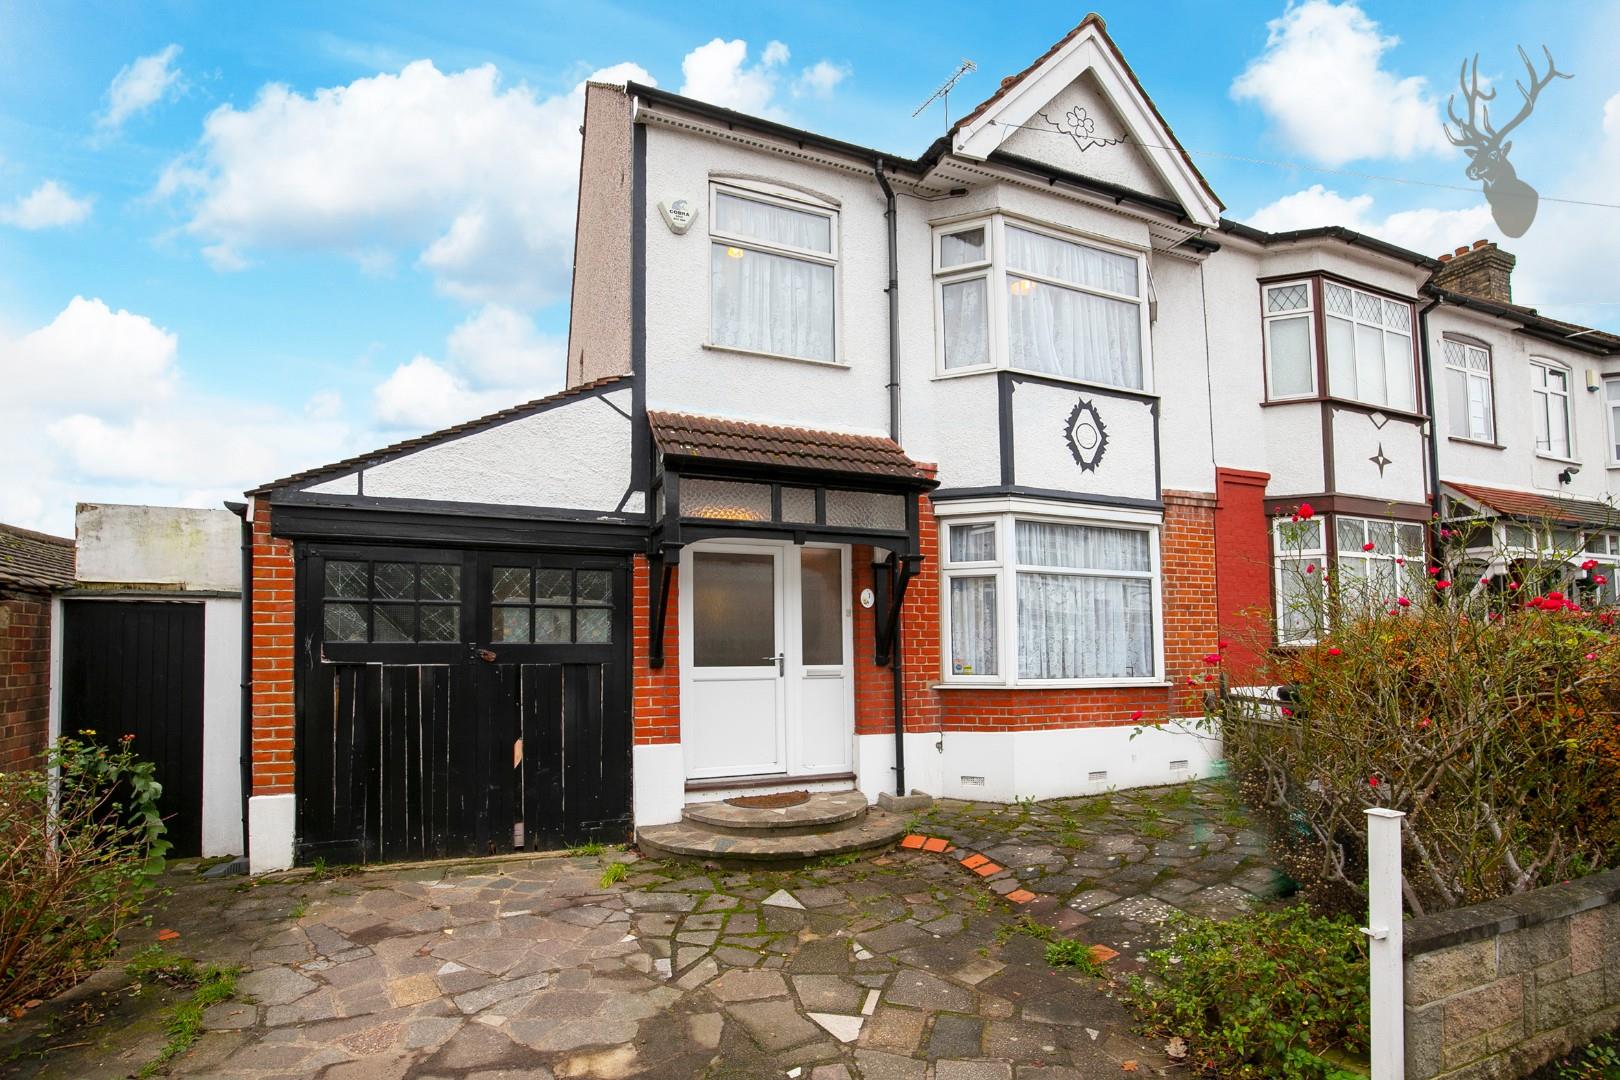 Similar Property: House in Woodford Green